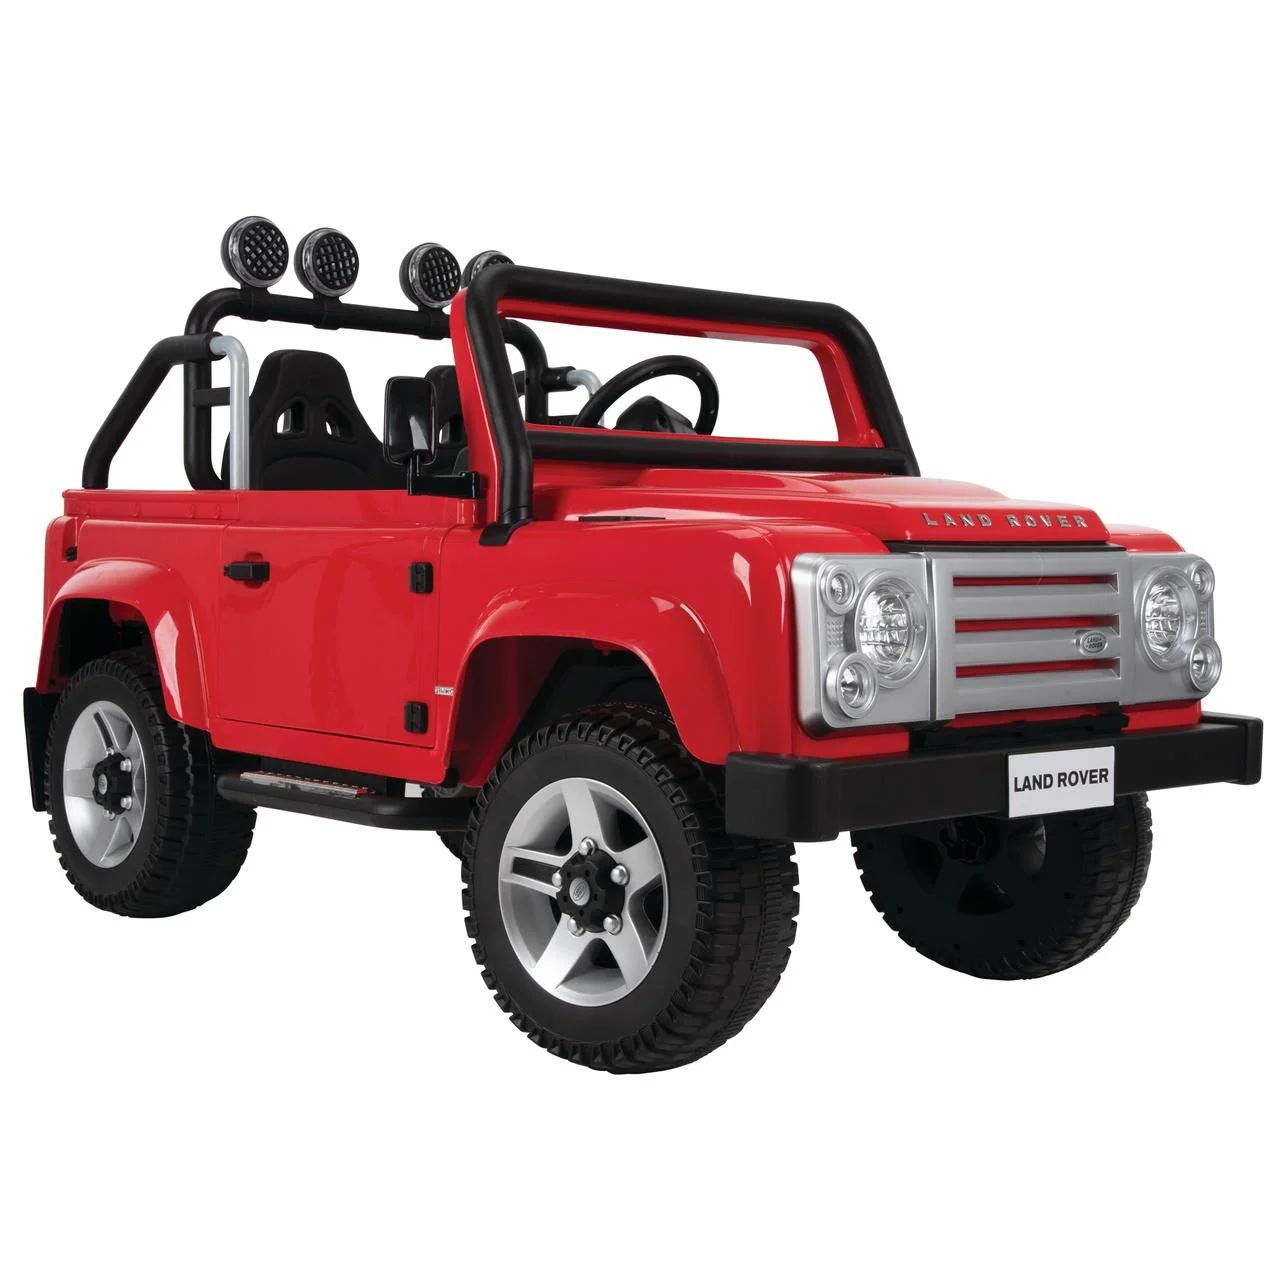 12V Land Rover Defender Electric Kids Car, Red by Huffy | Walmart (US)